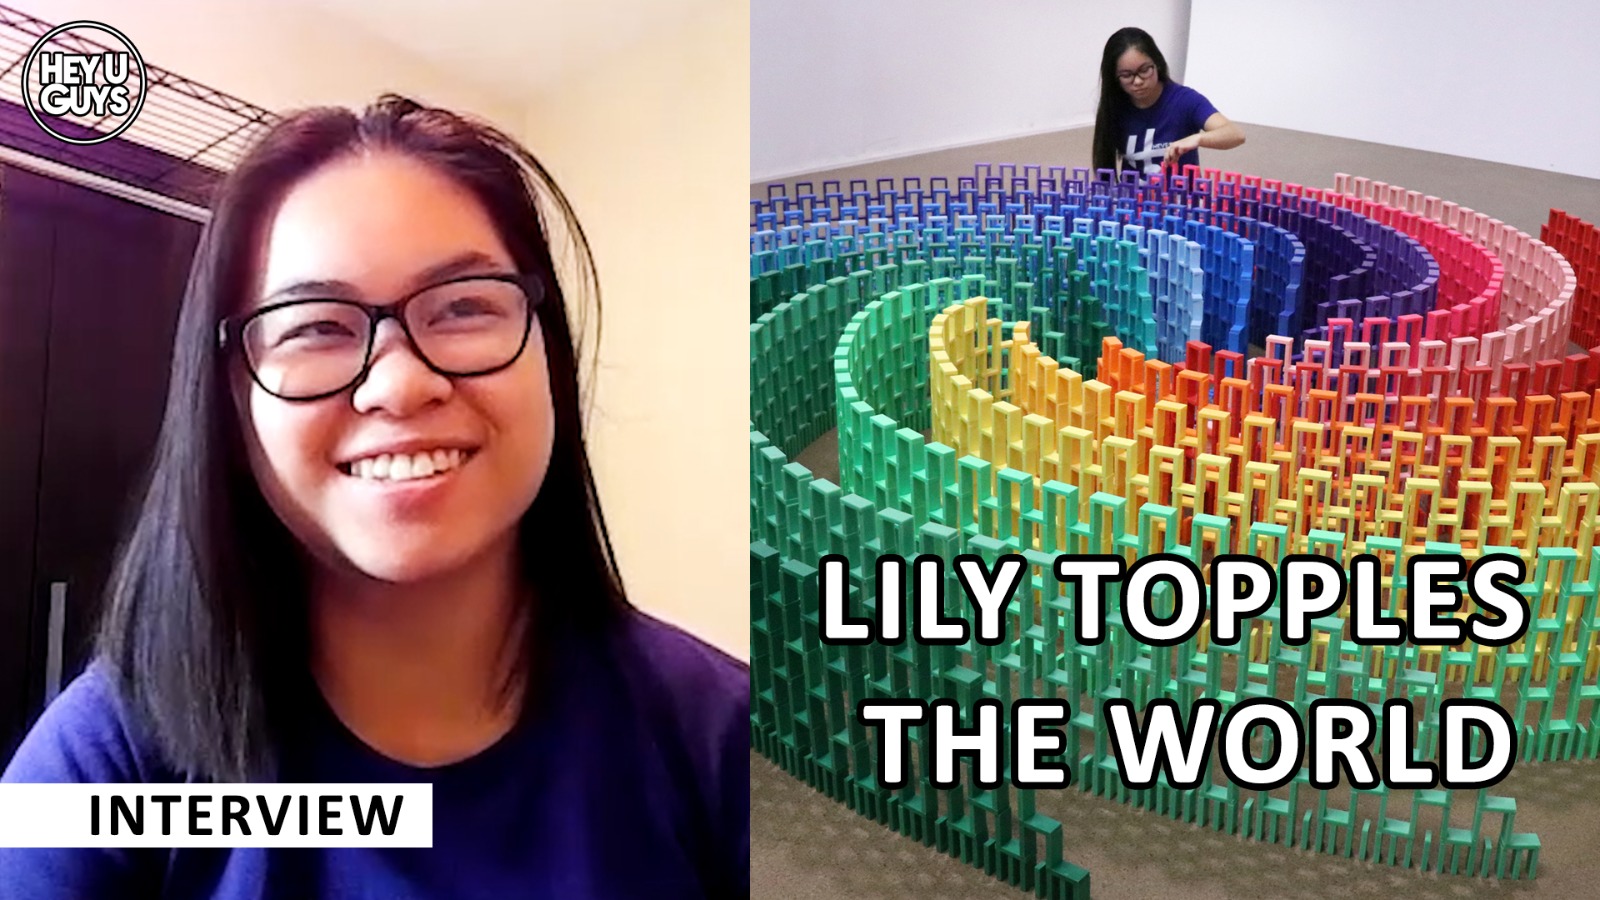 Lily Topples the World